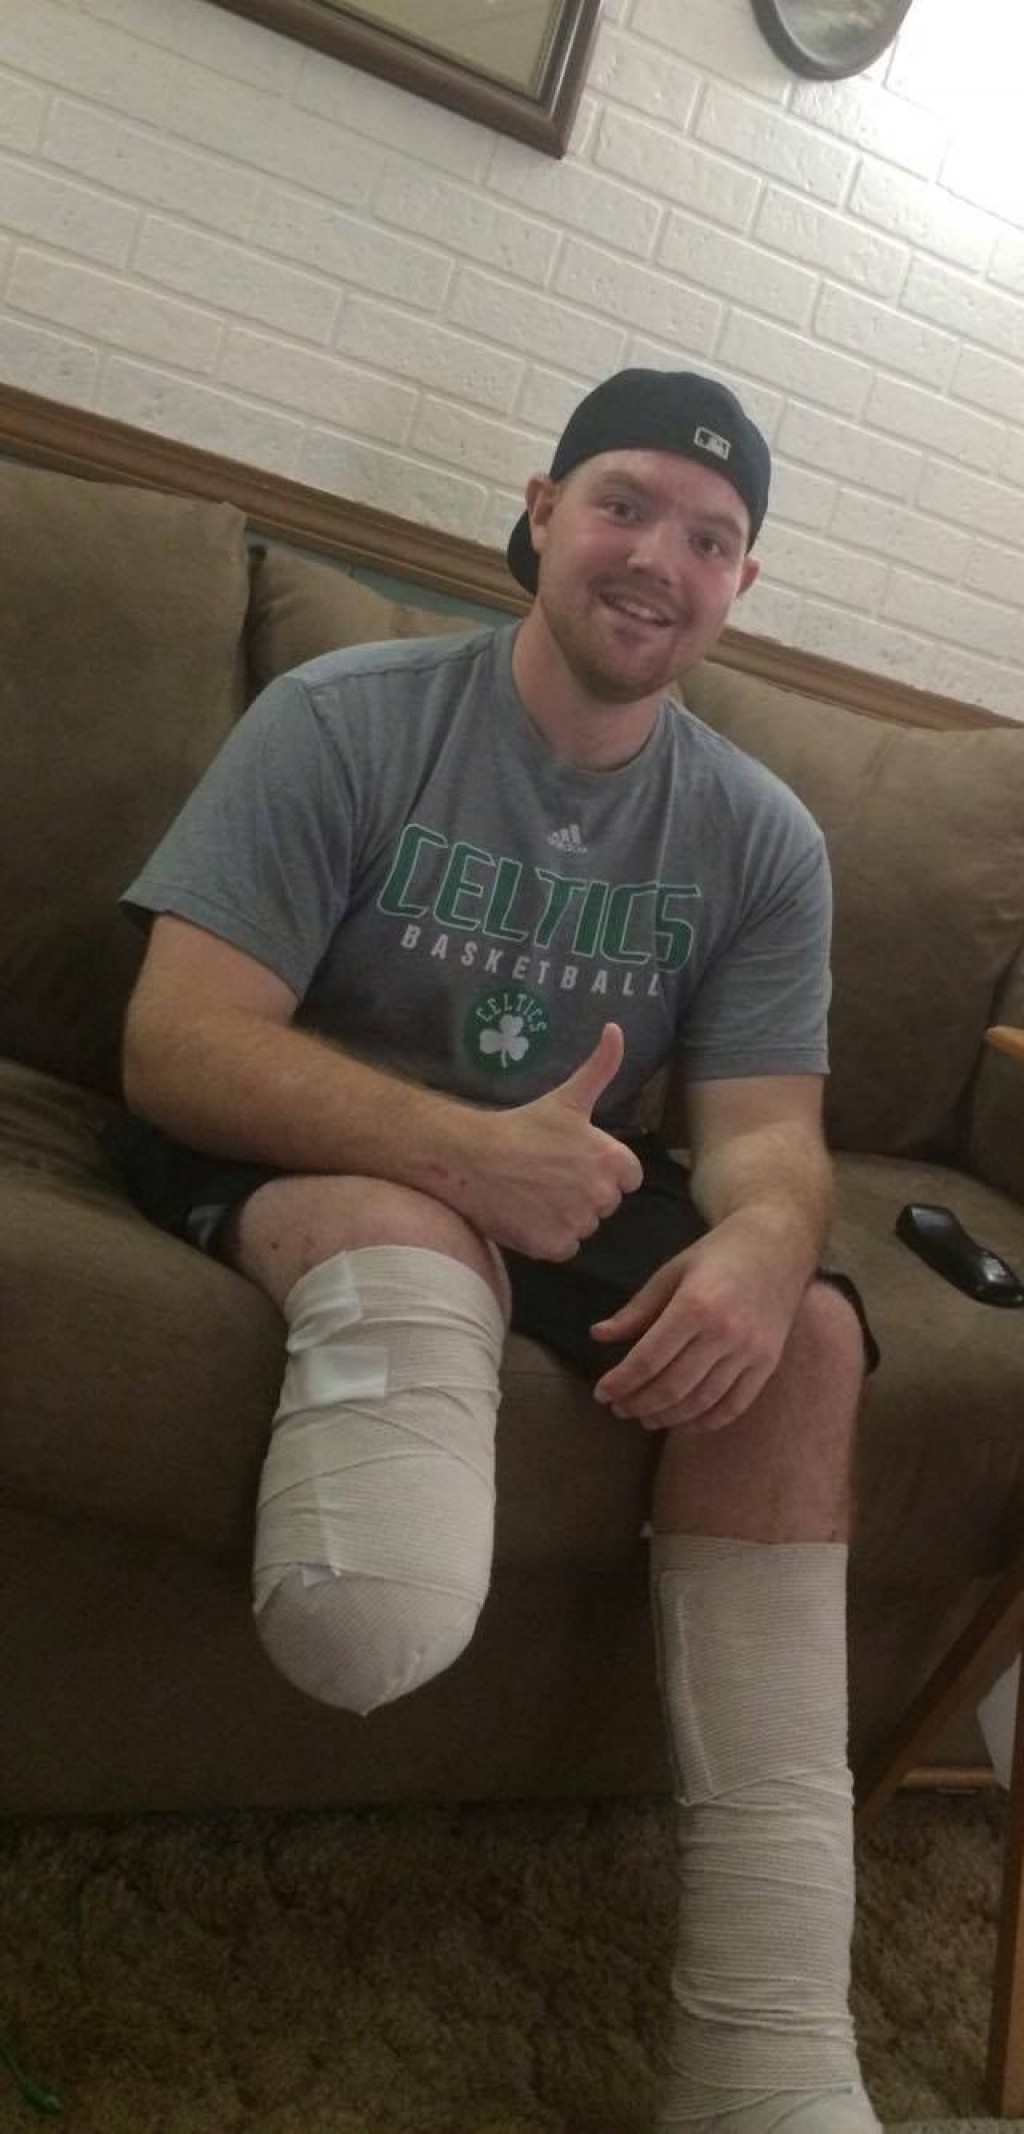 Castleton alum recovering after serious accident